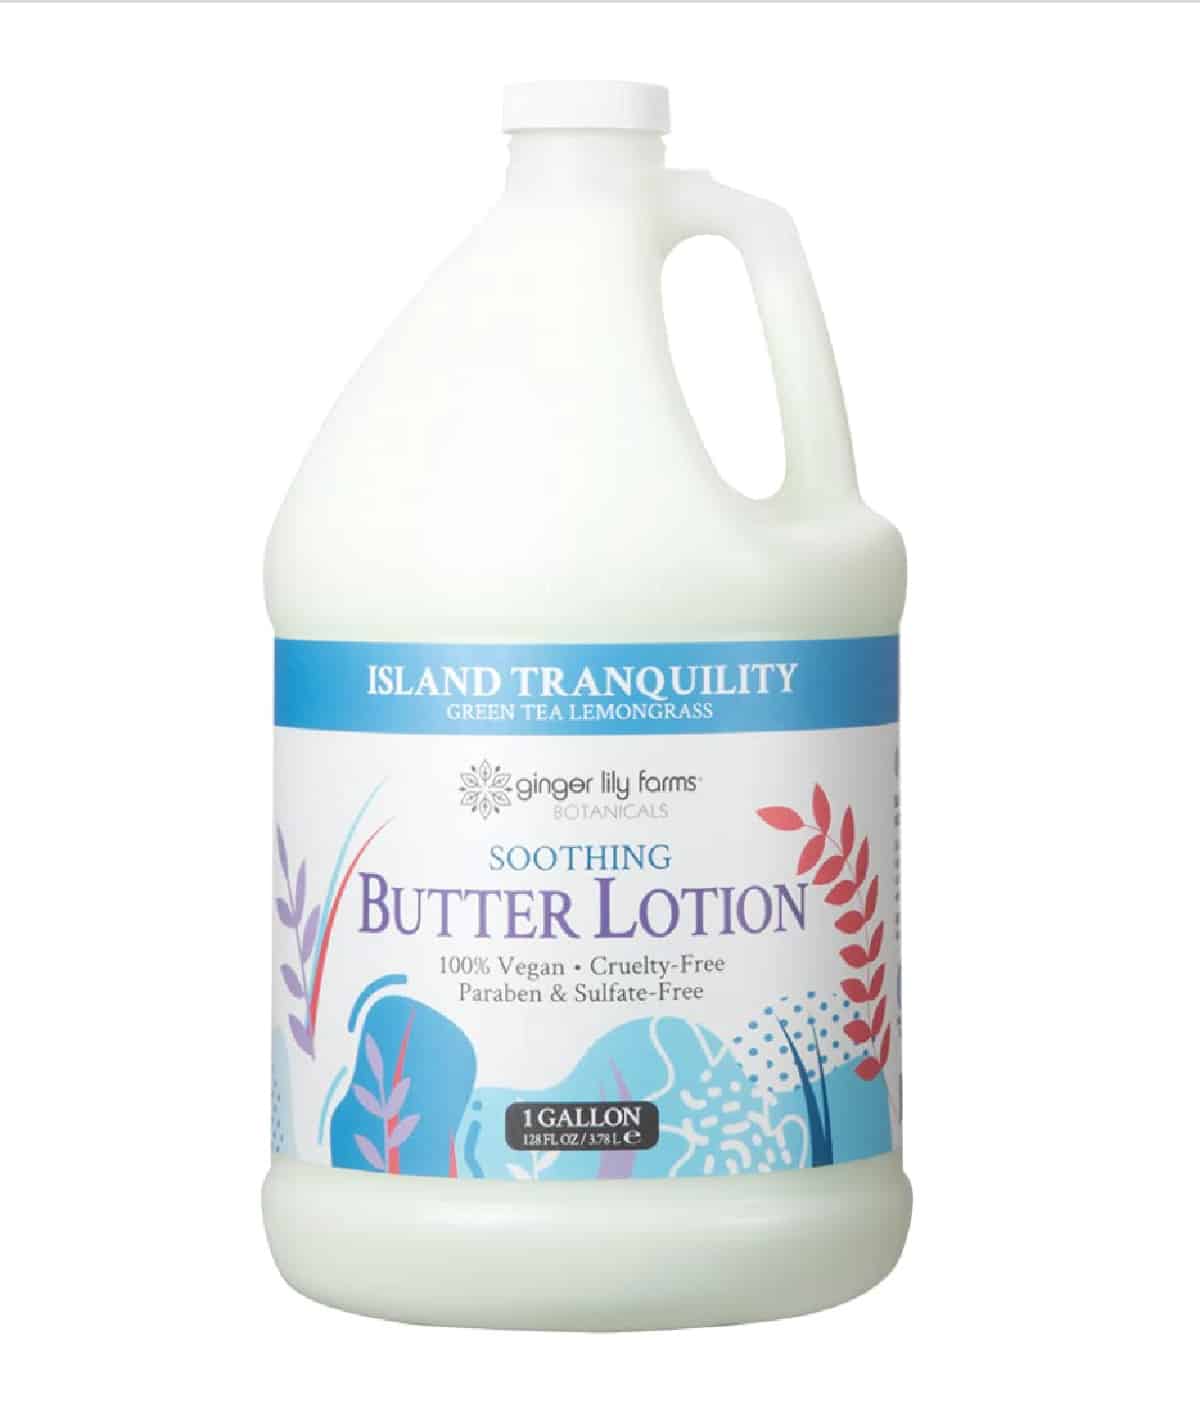 A white gallon jug of Ginger Lily Farms Butter Lotion against a white background.